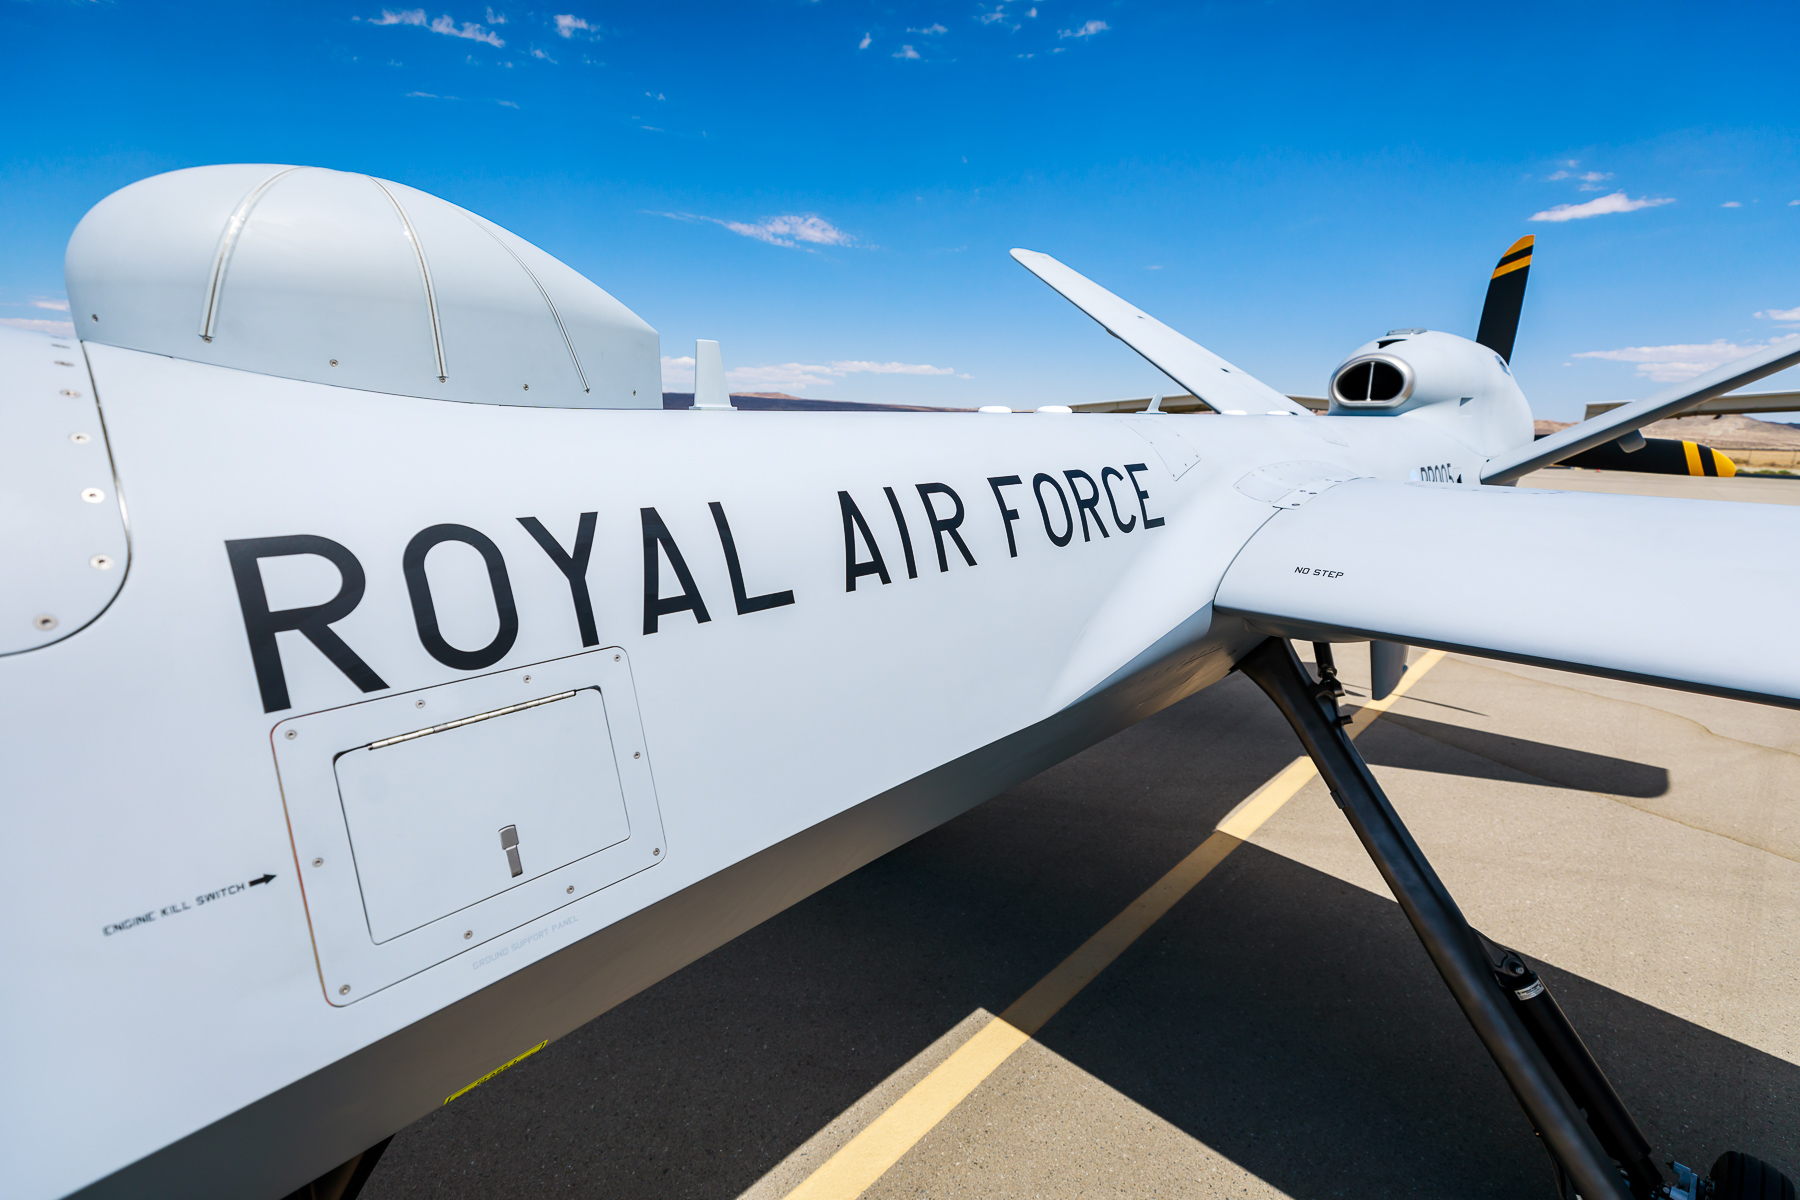 Image shows a close up of the Protector with Royal Air Force painted on the side.